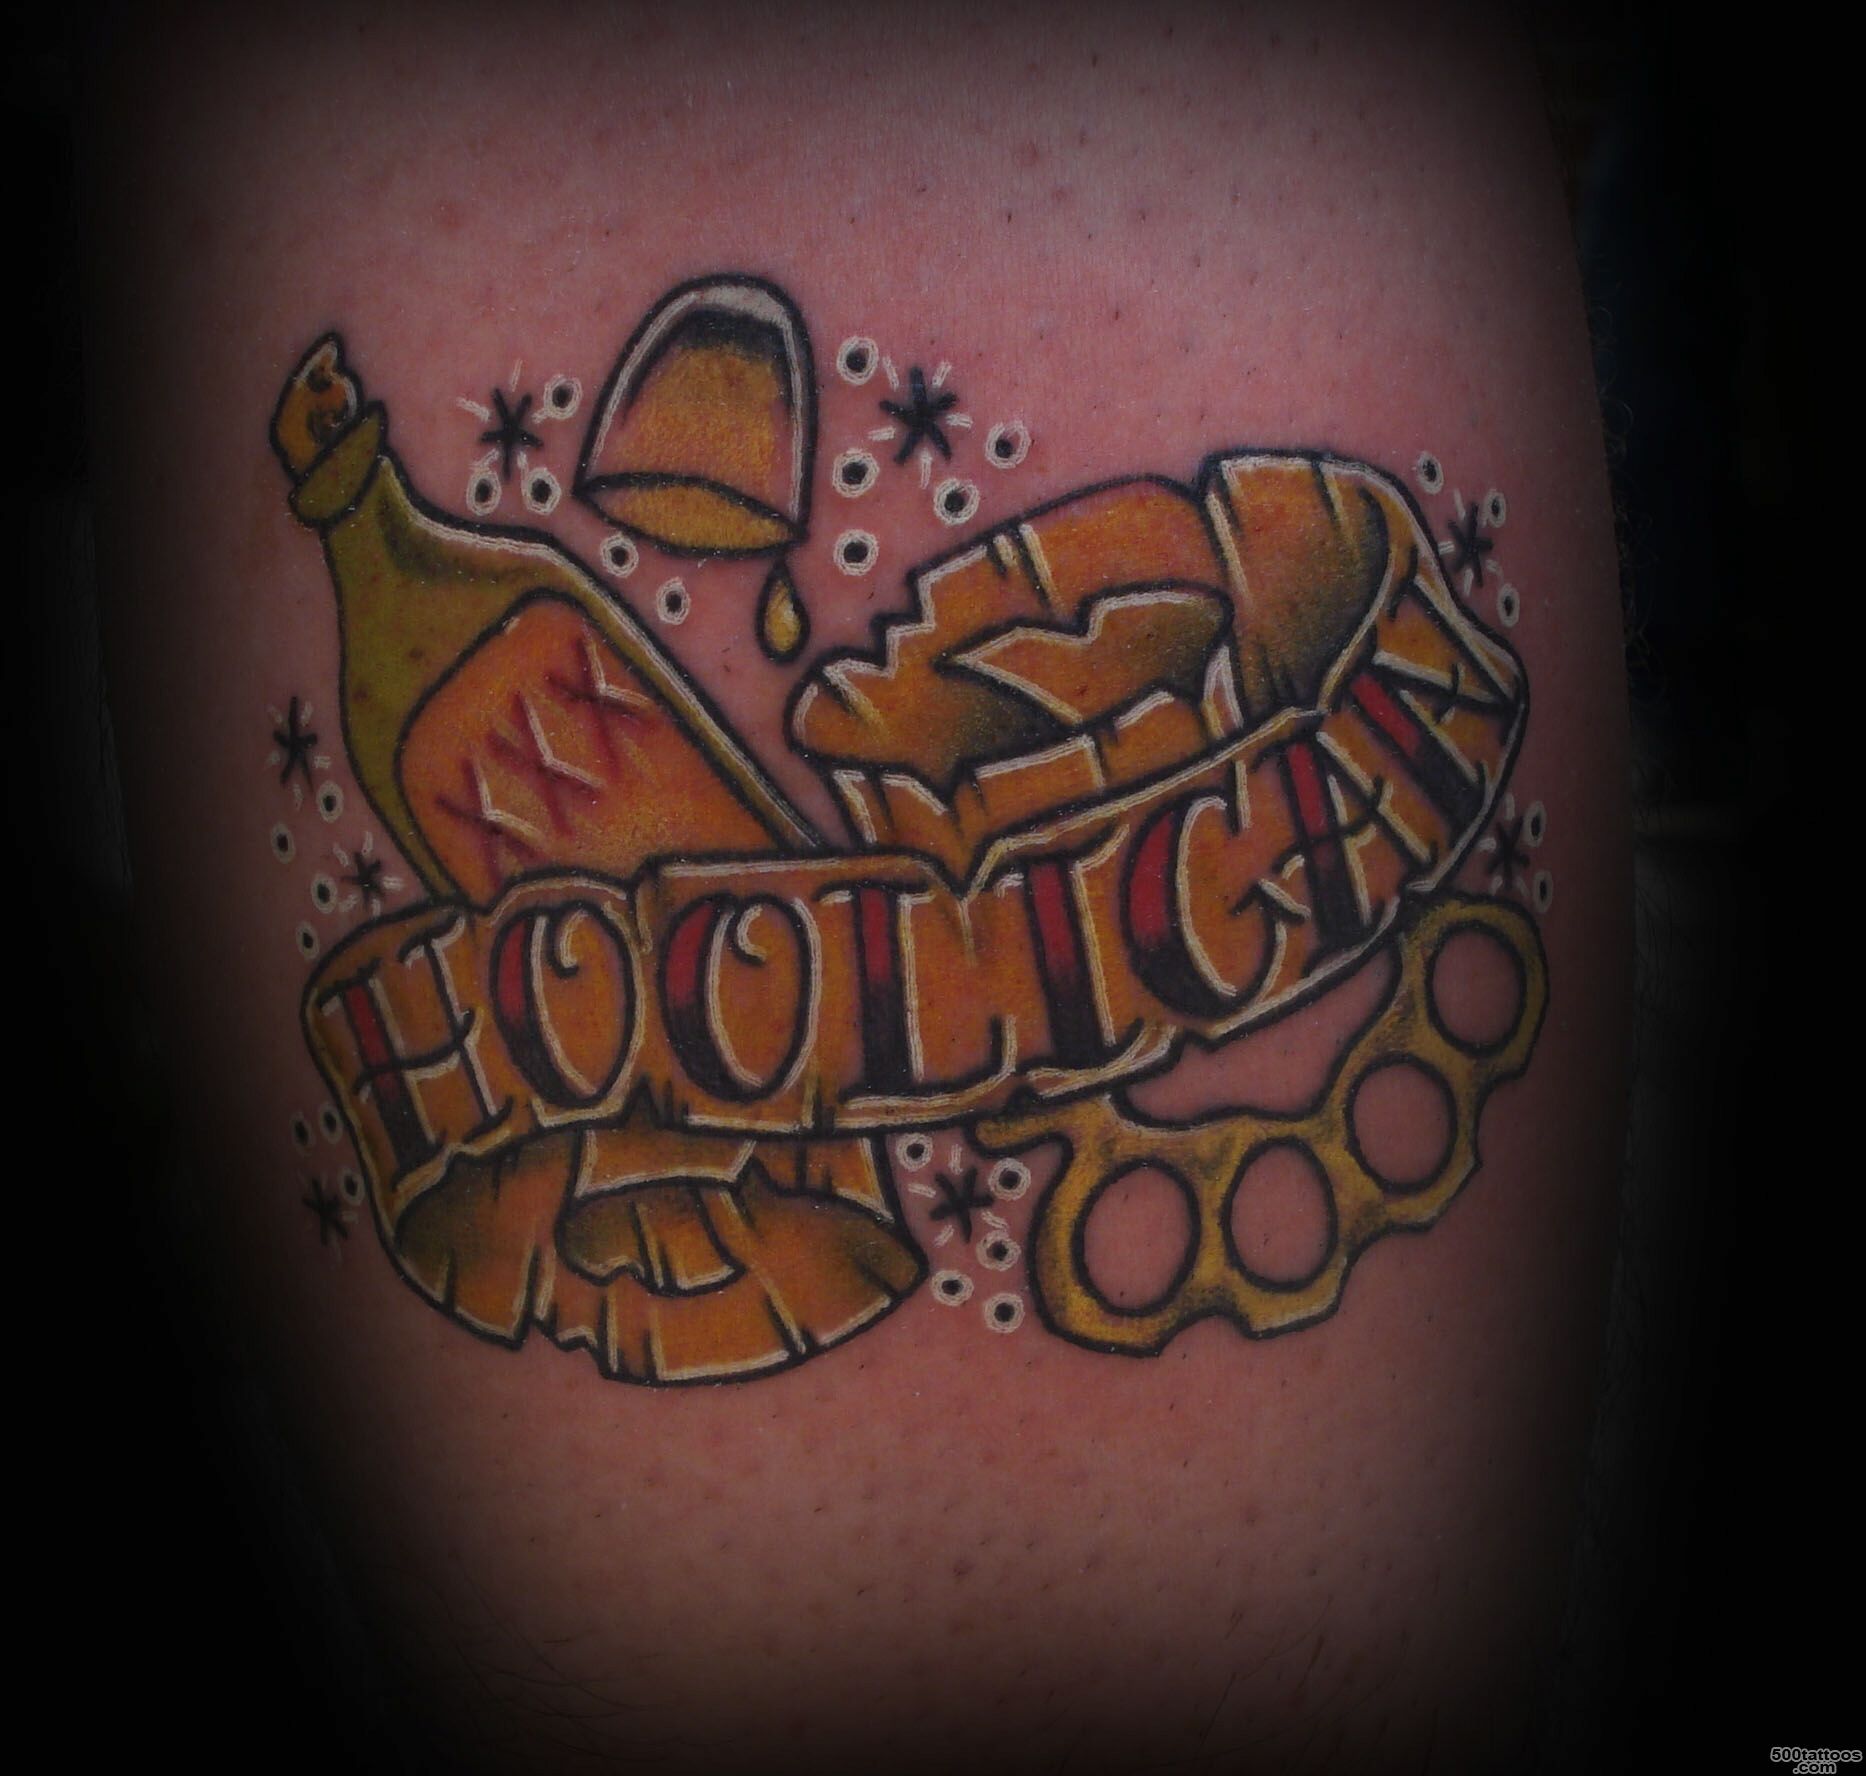 Pin Hooligan Tattoos Page 2 Picture on Pinterest_22.JPG